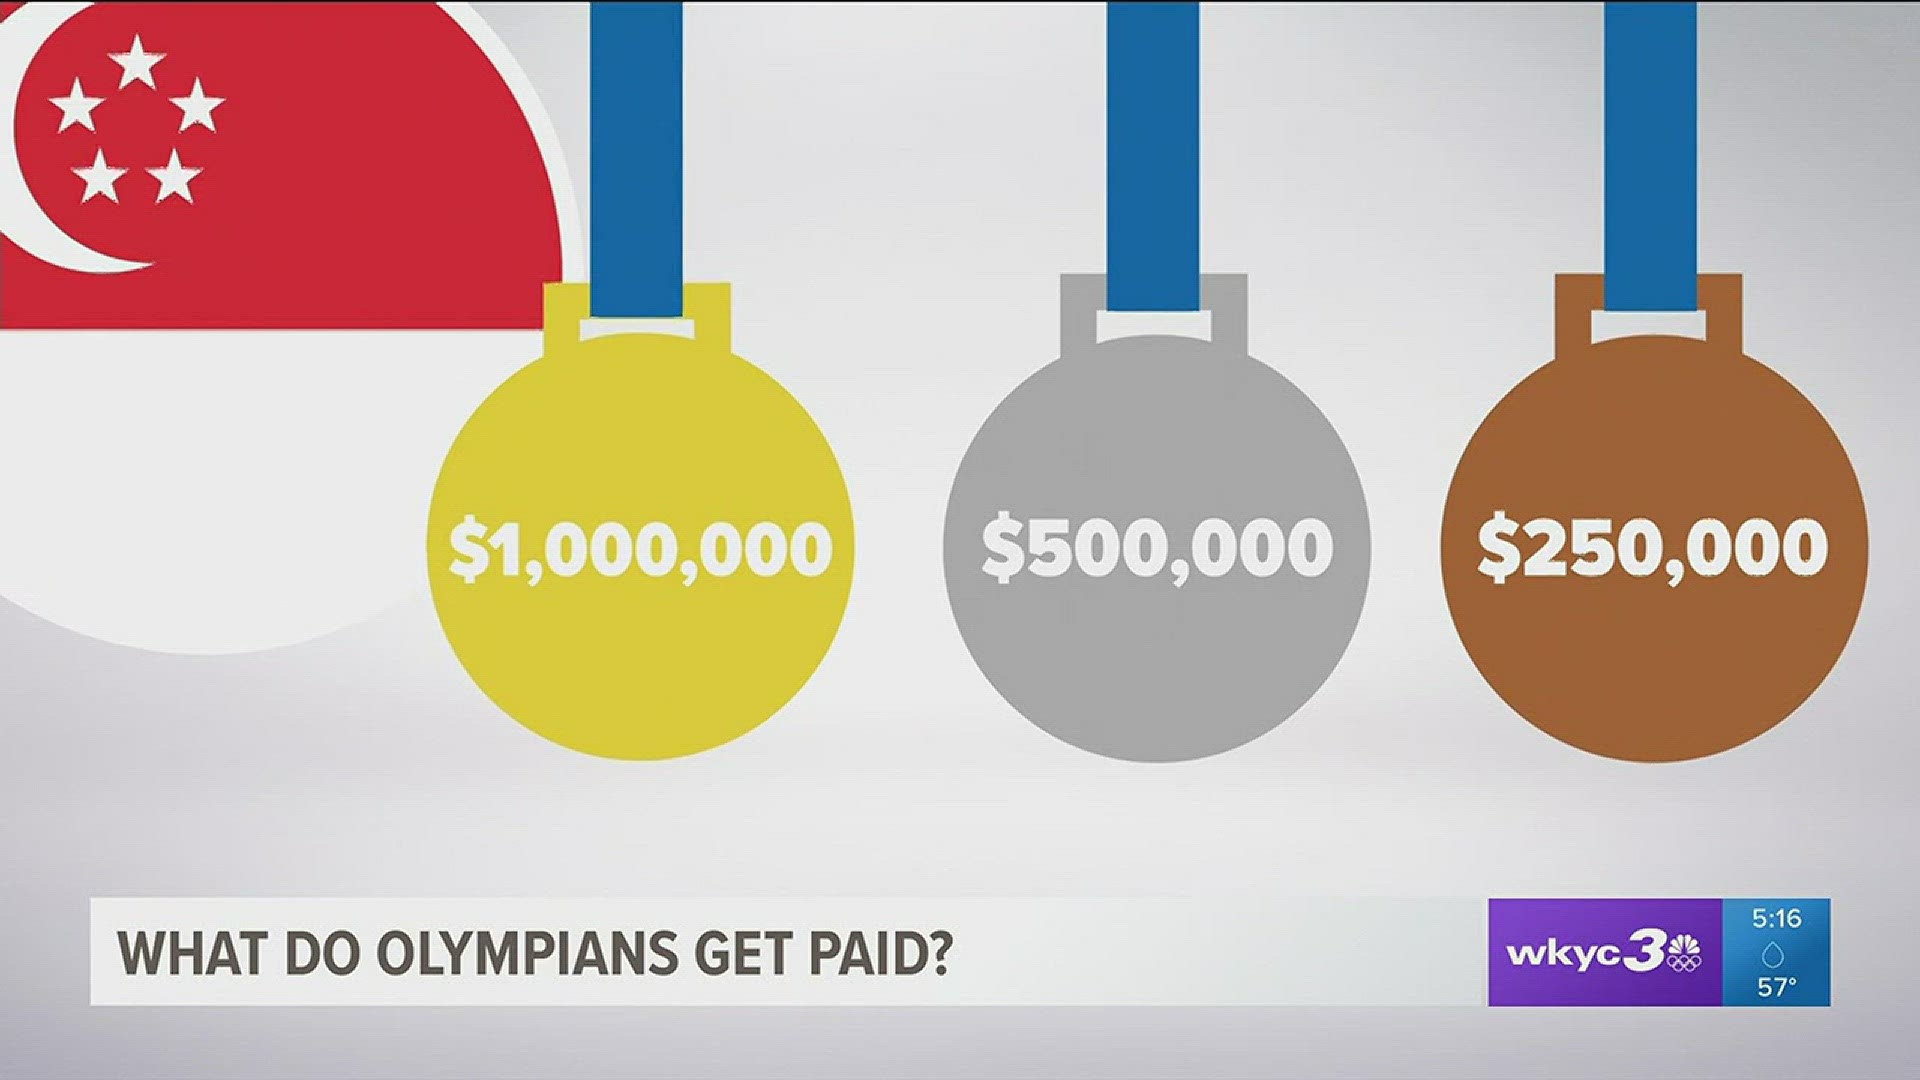 How much do Olympic athletes get paid?